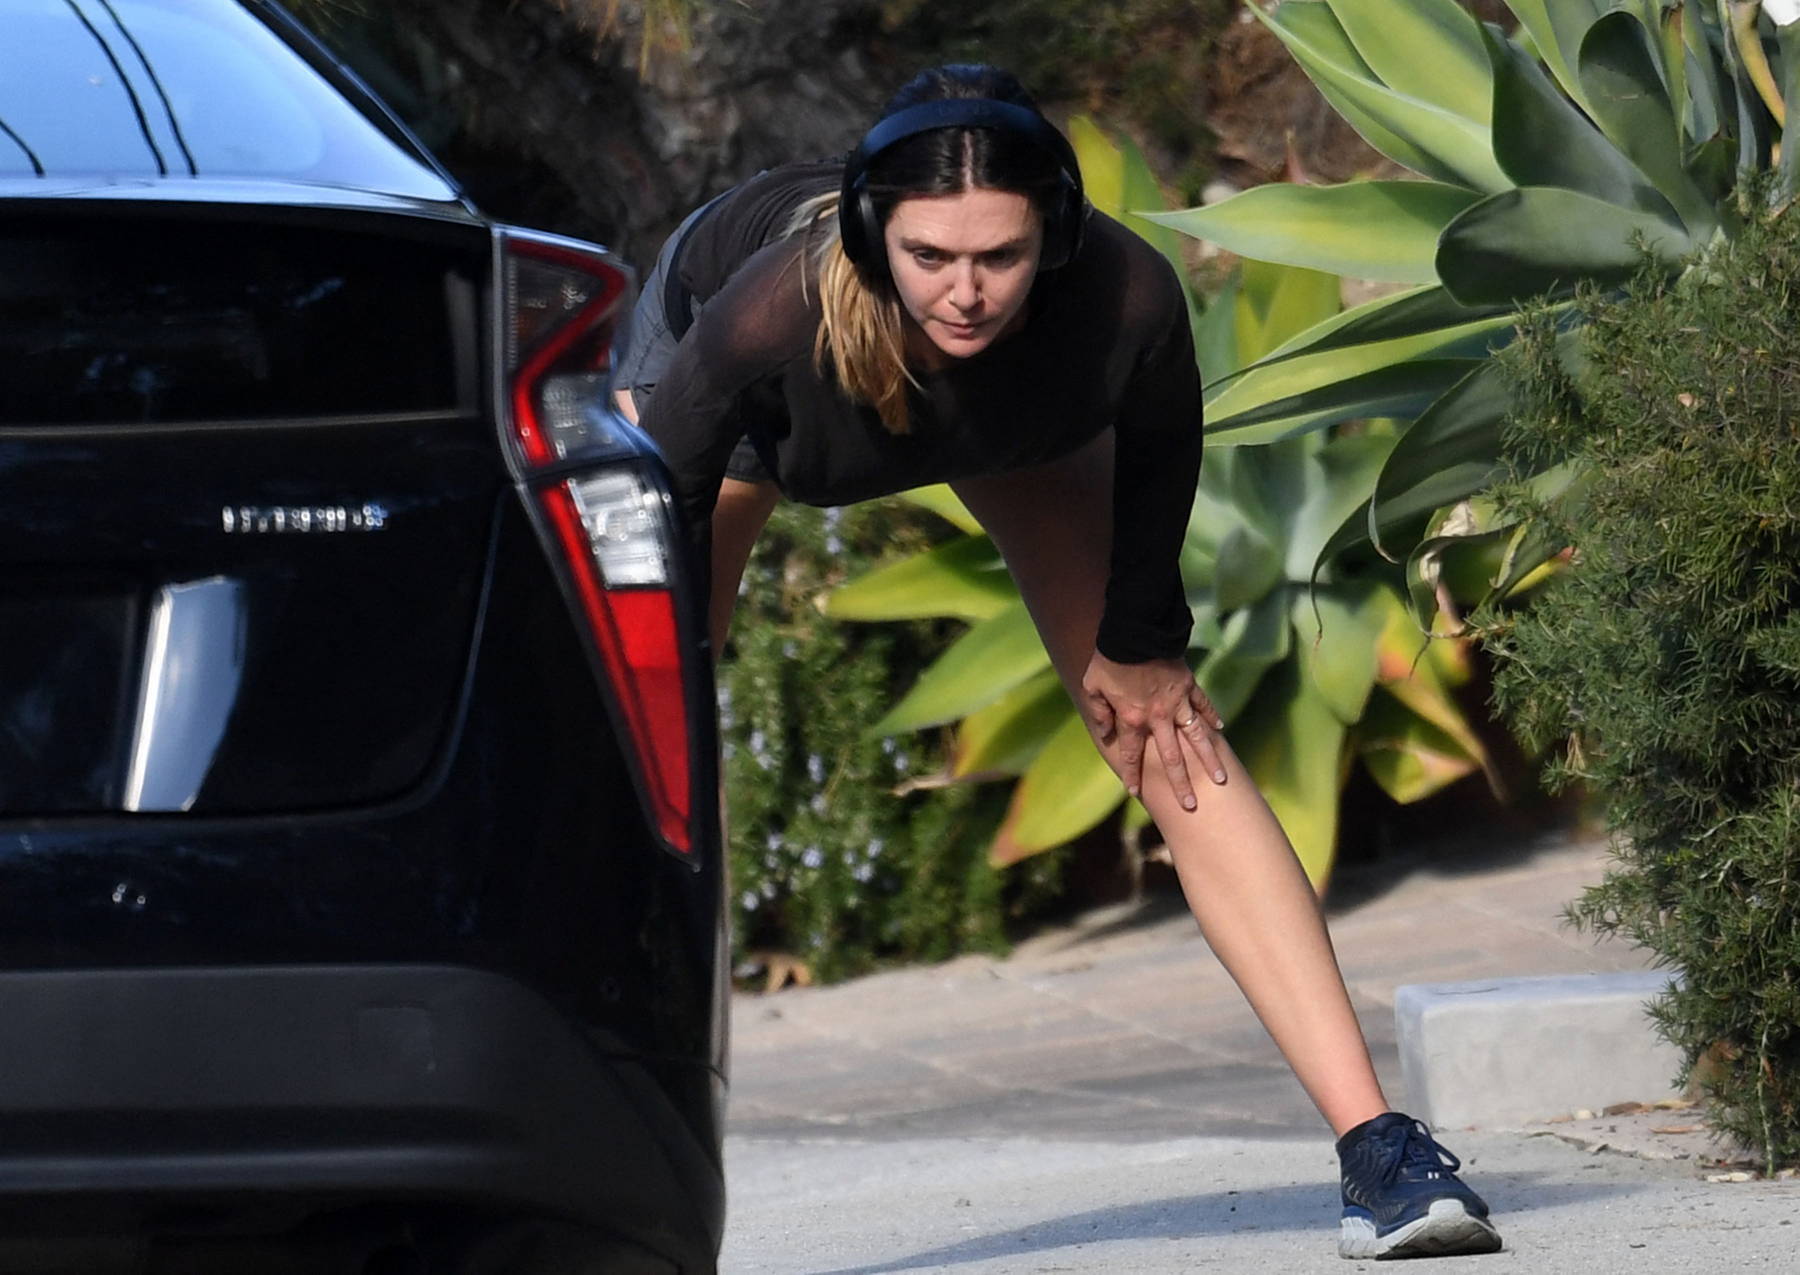 Elizabeth Olsen sweats it out in a see-through top over sports bra and  shorts during